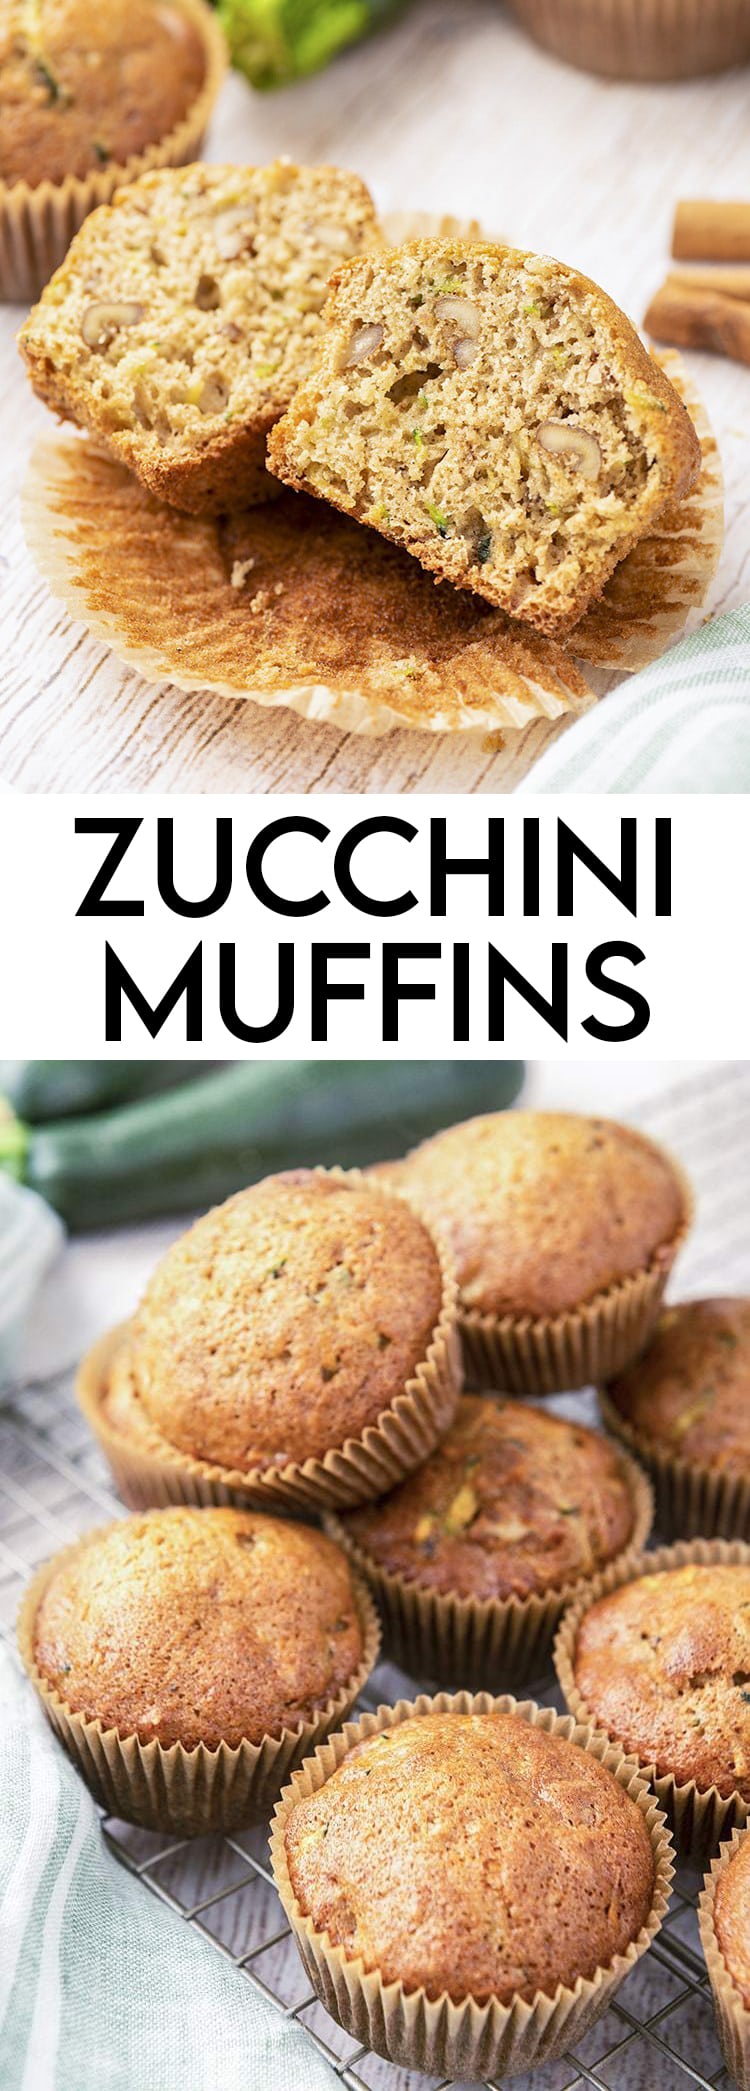 A collage of two photos of zucchini muffins. The first photo is a muffin cut in half. The second is a pile of zucchini muffins.